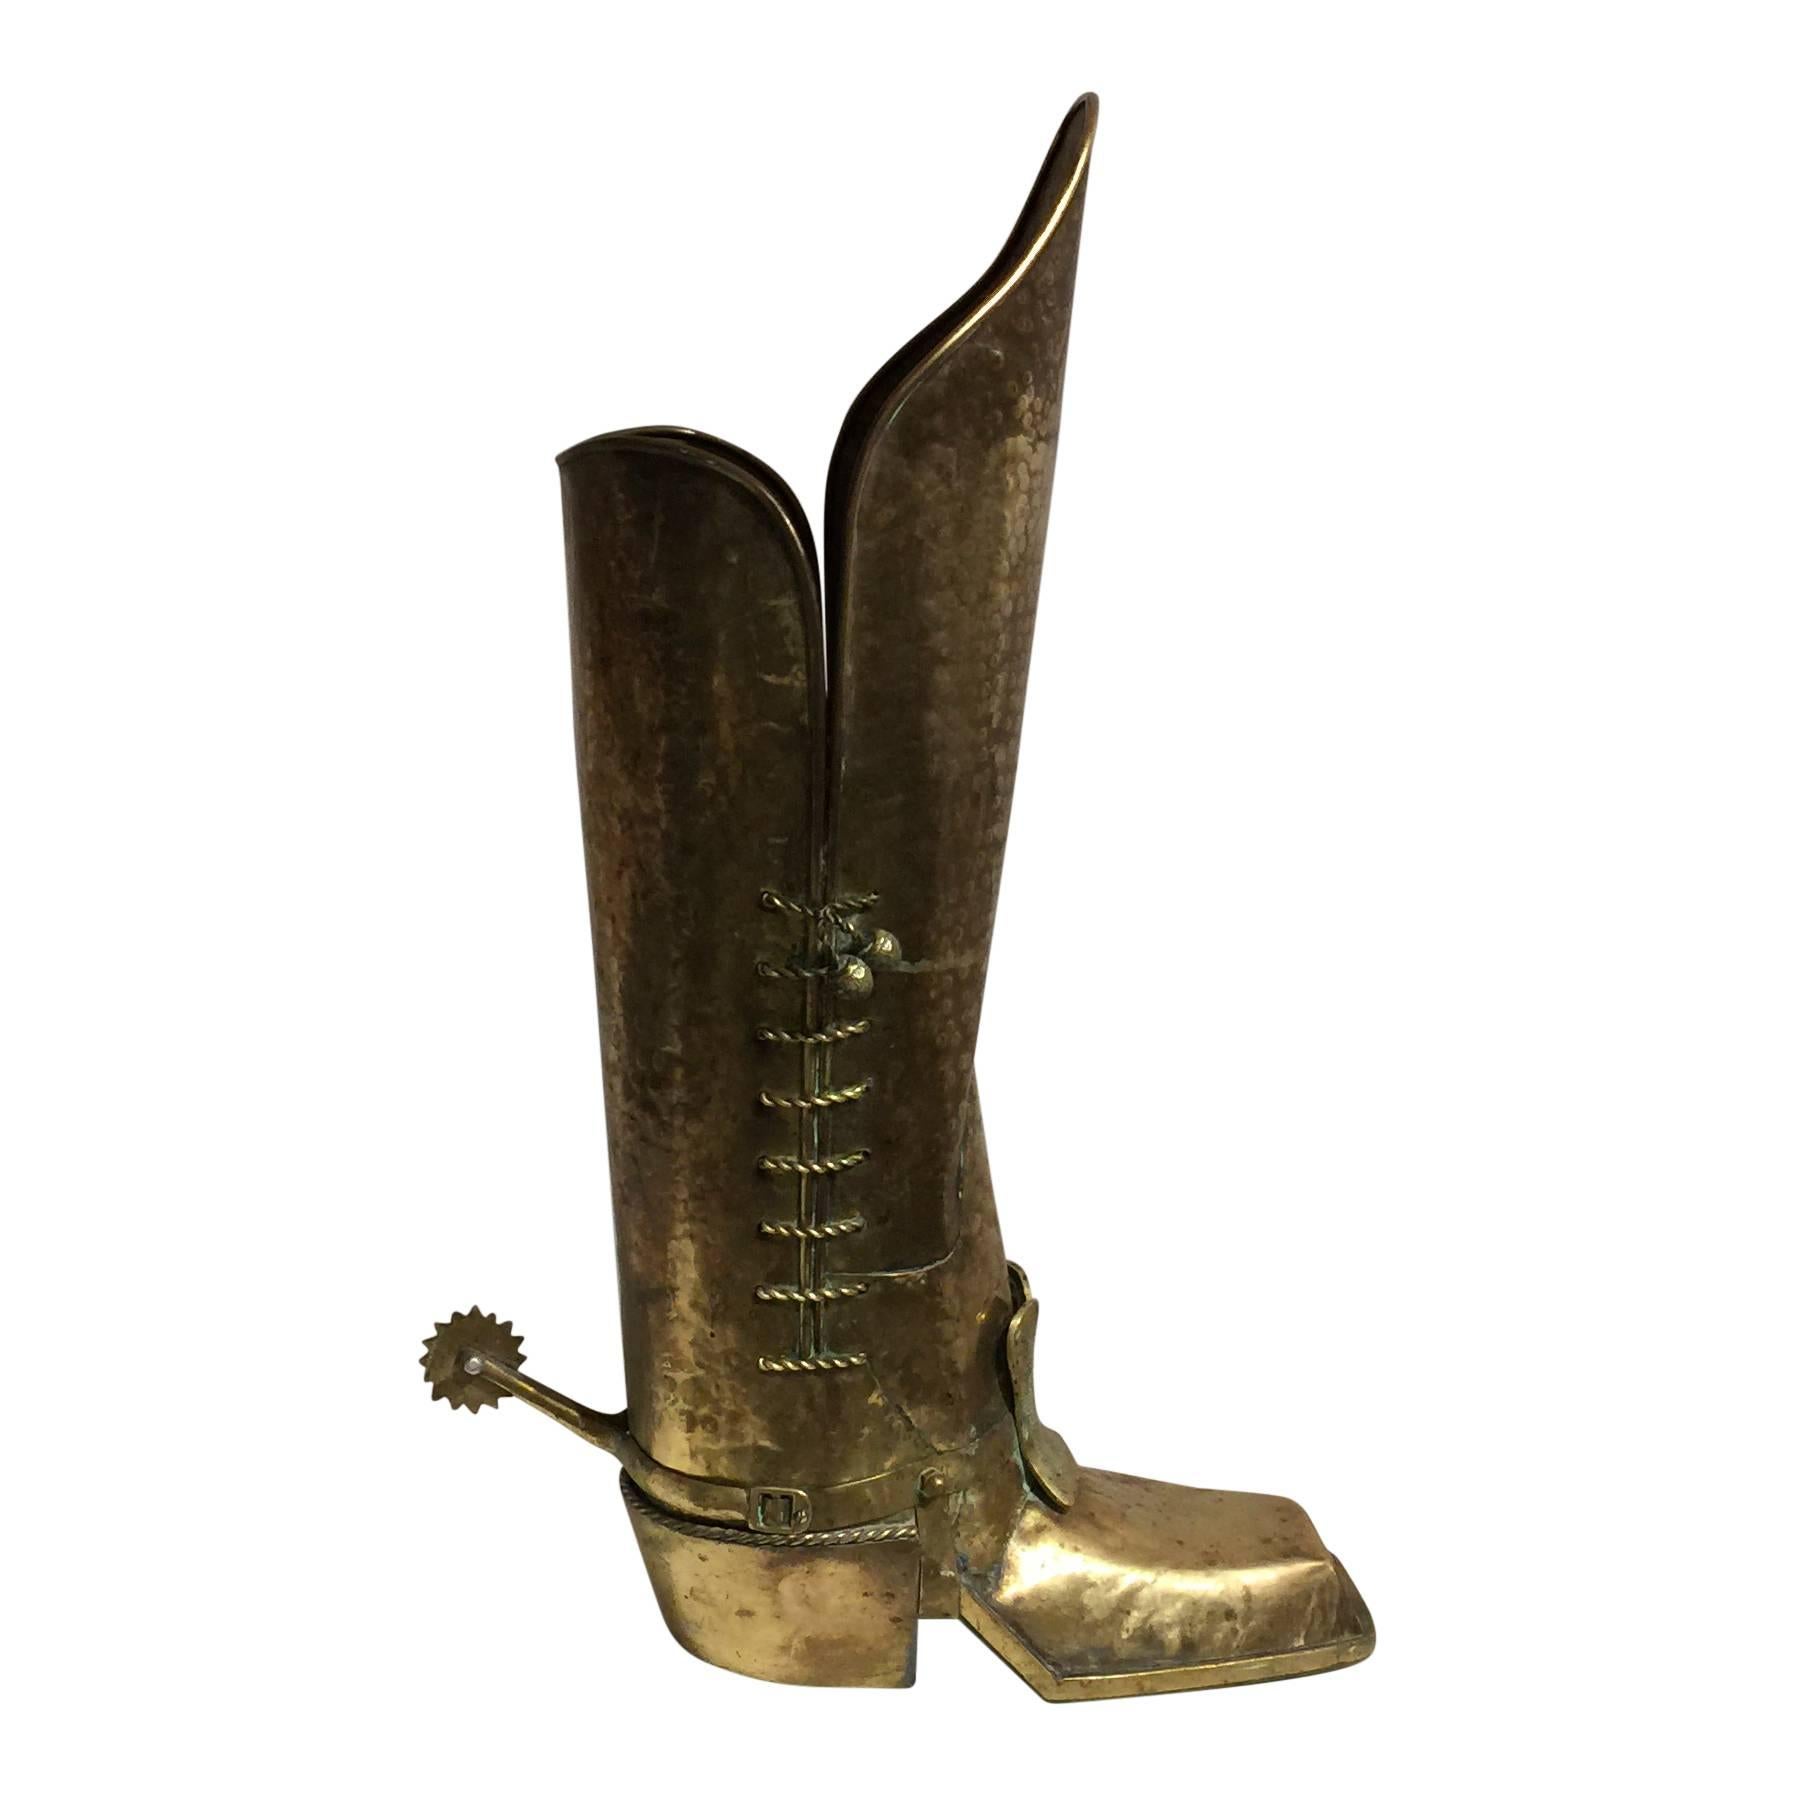 One of a kind patinated and hammered brass sheet umbrella Stand in shape of boot.